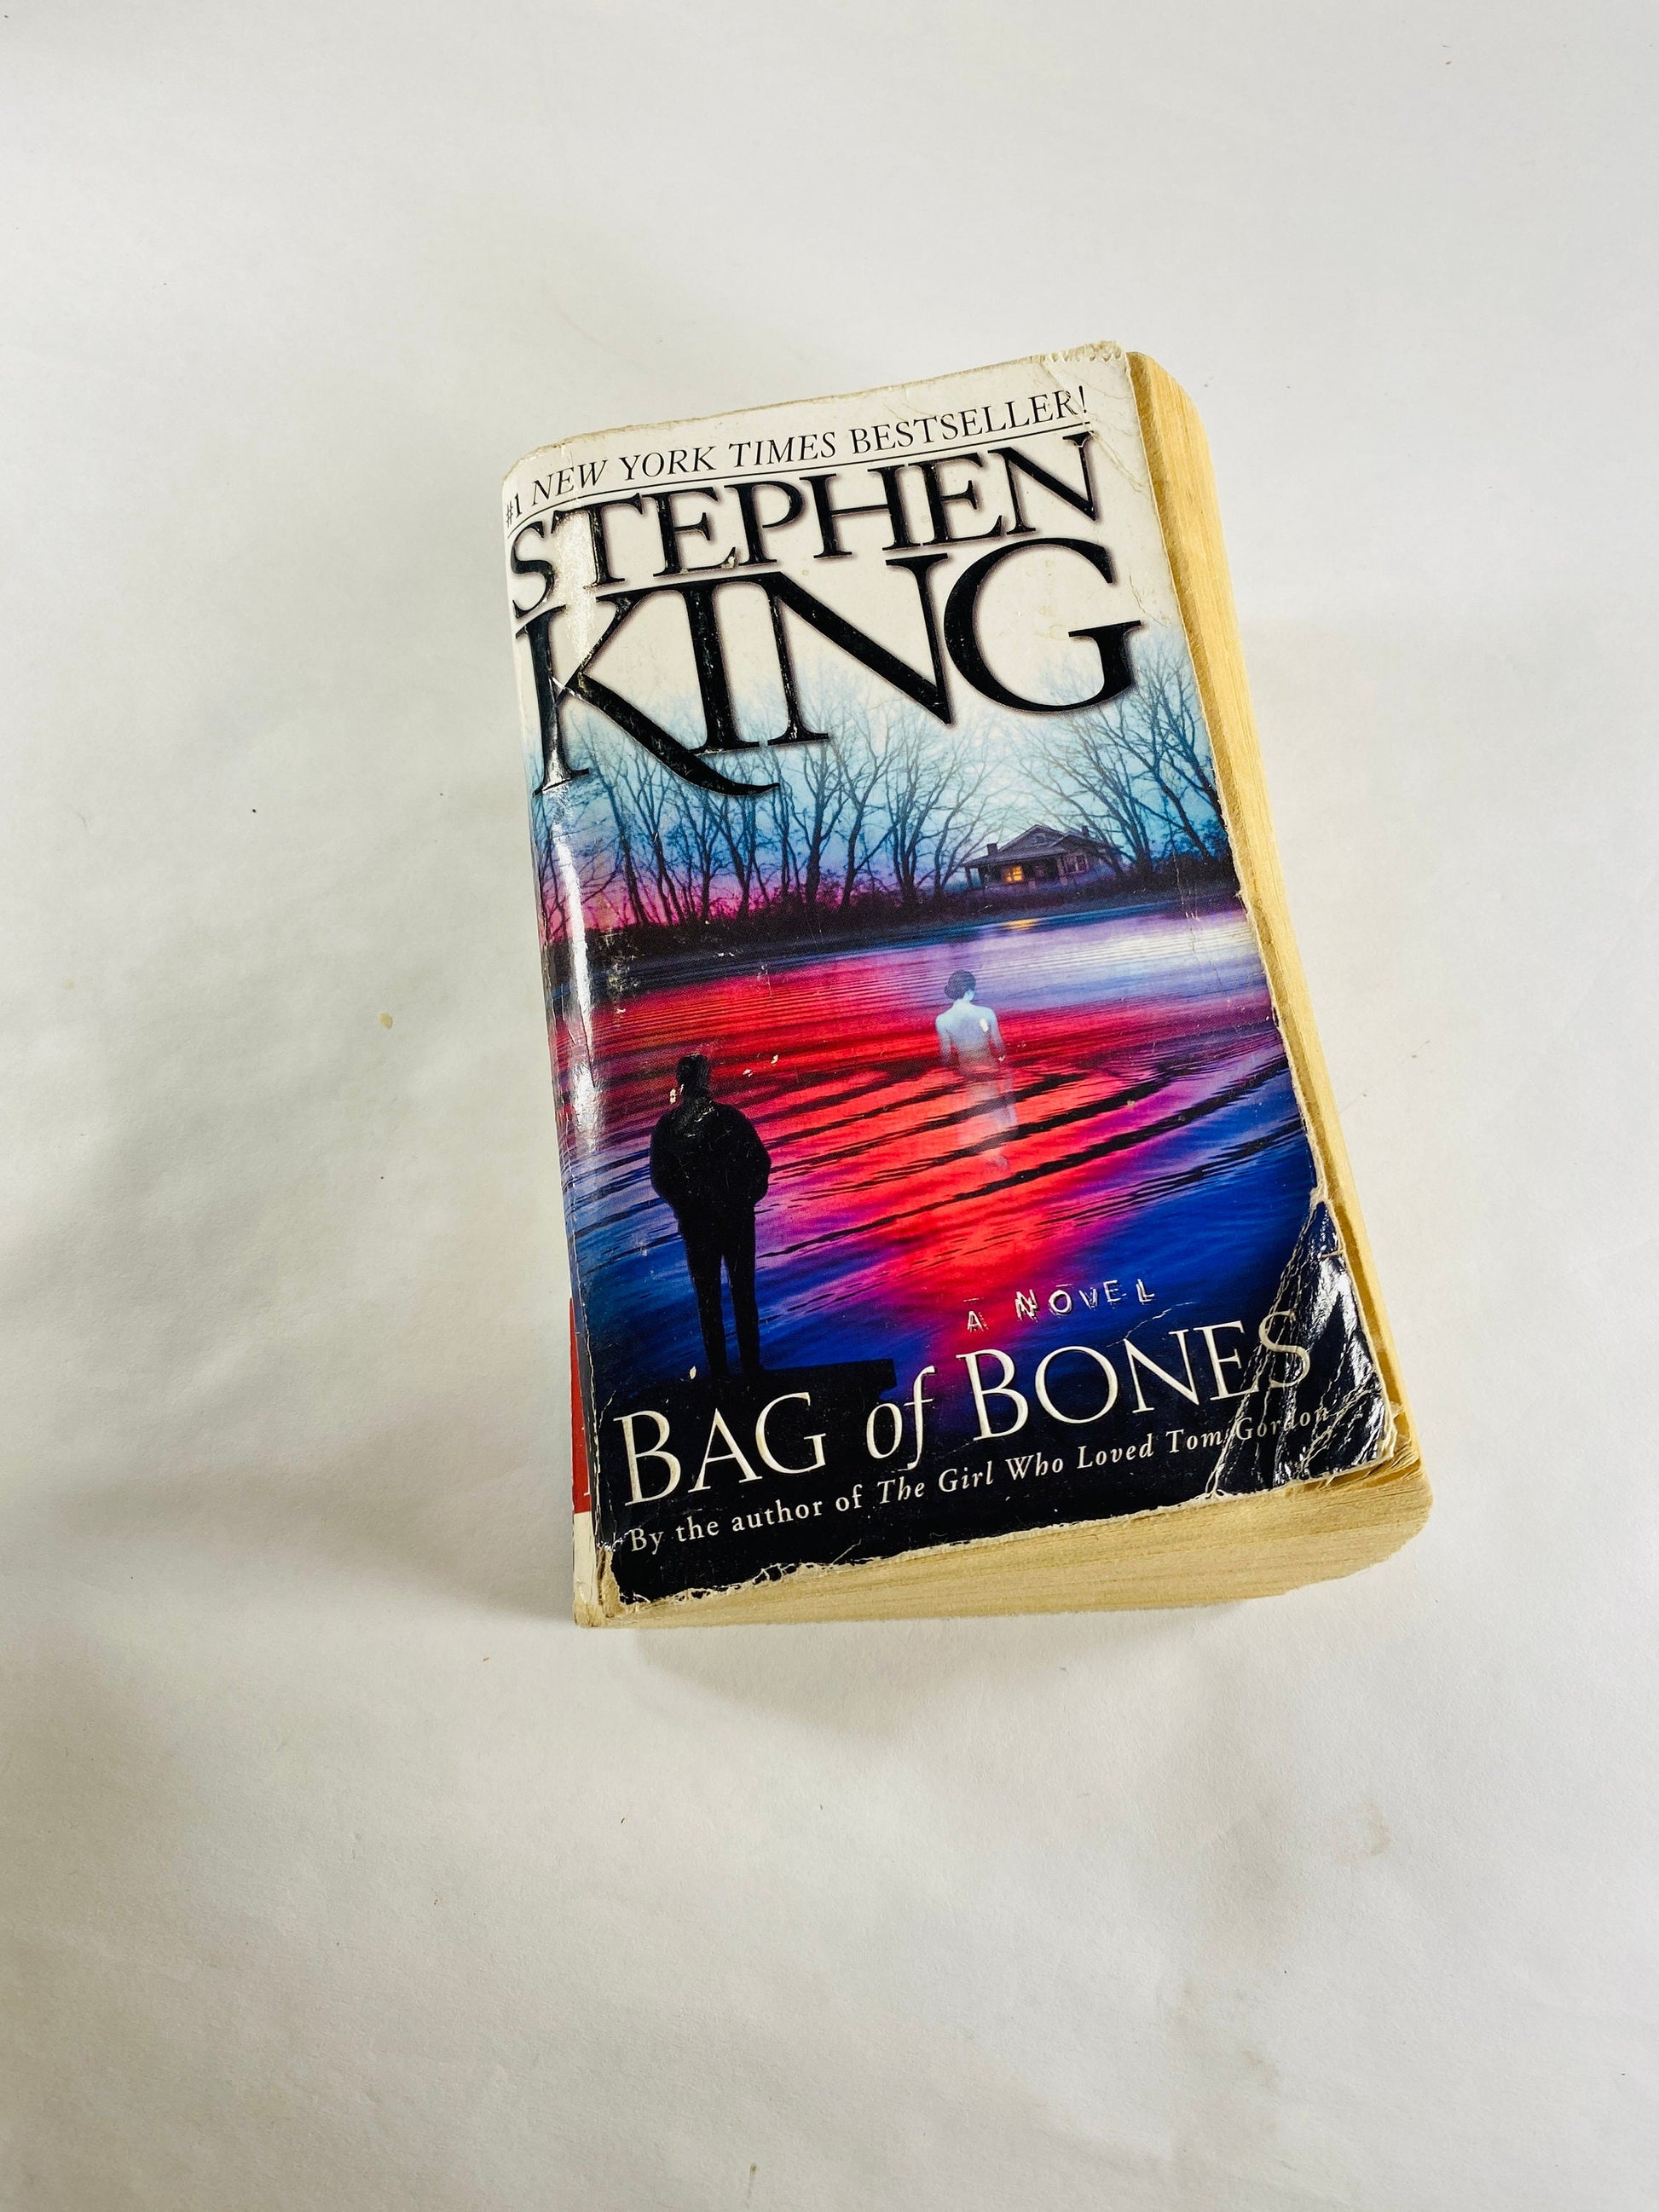 Bag of Bones by Stephen King Vintage paperback book circa 1999 Horror goth gift Grieving widower plagued by vivid nightmares POOR CONDITION